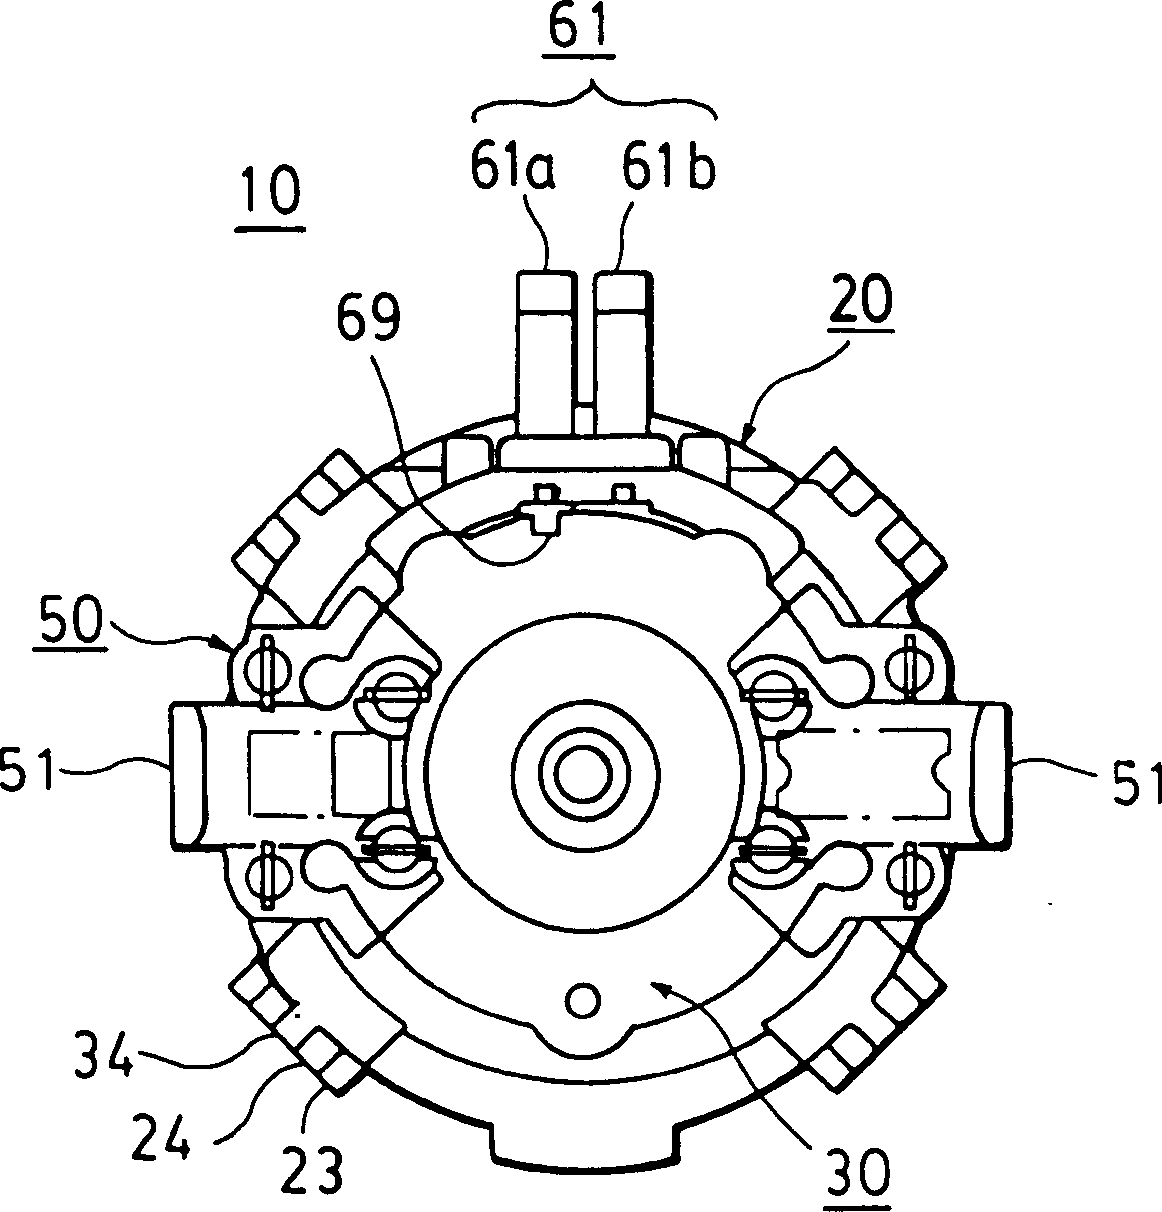 Motor with earthing structure to reduce radio noise